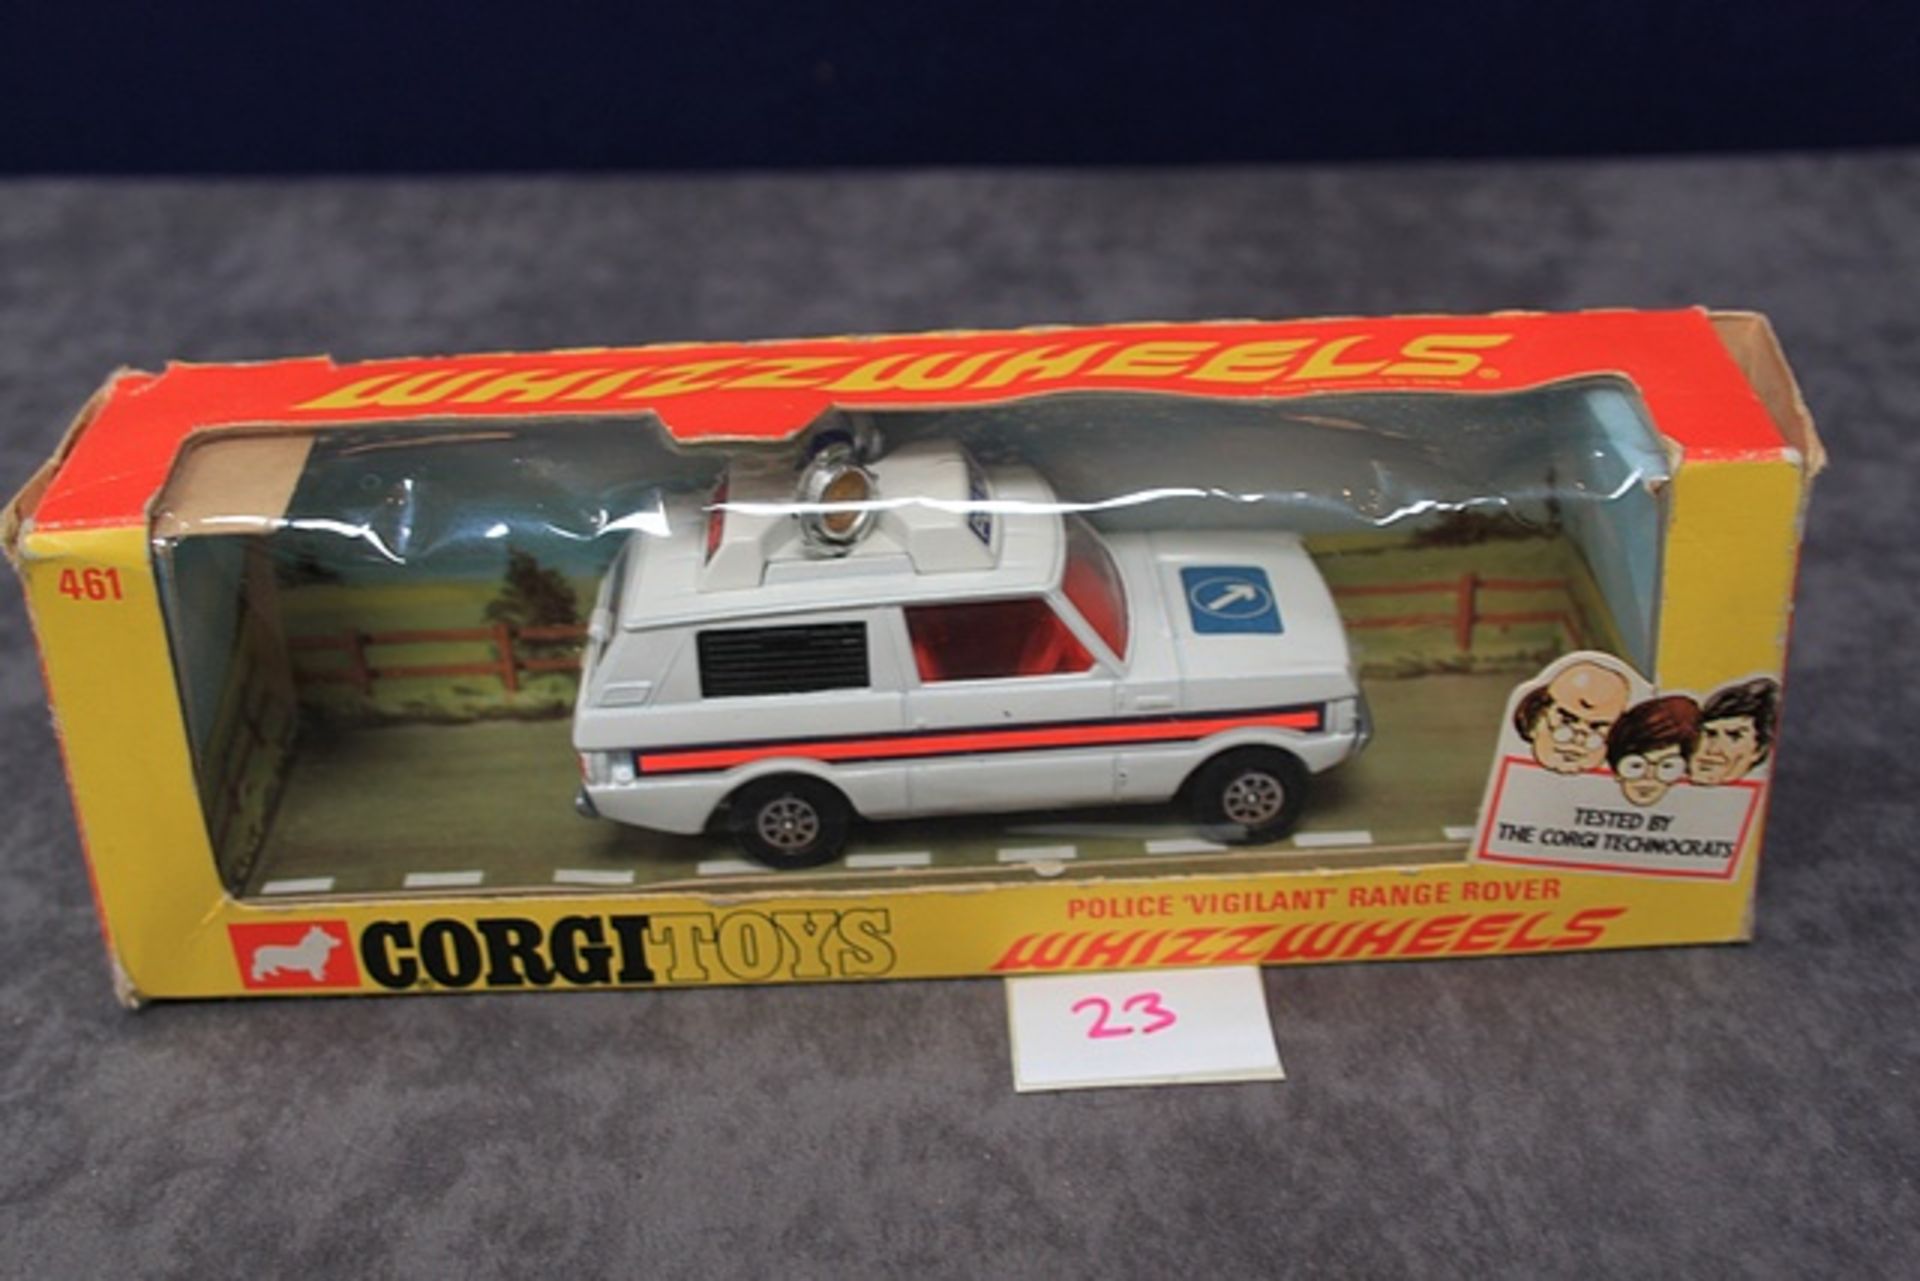 Corgi Whizzwheels Diecast Number 461 Police 'Vigilant' Range Rover With Excellent Box - Image 2 of 3